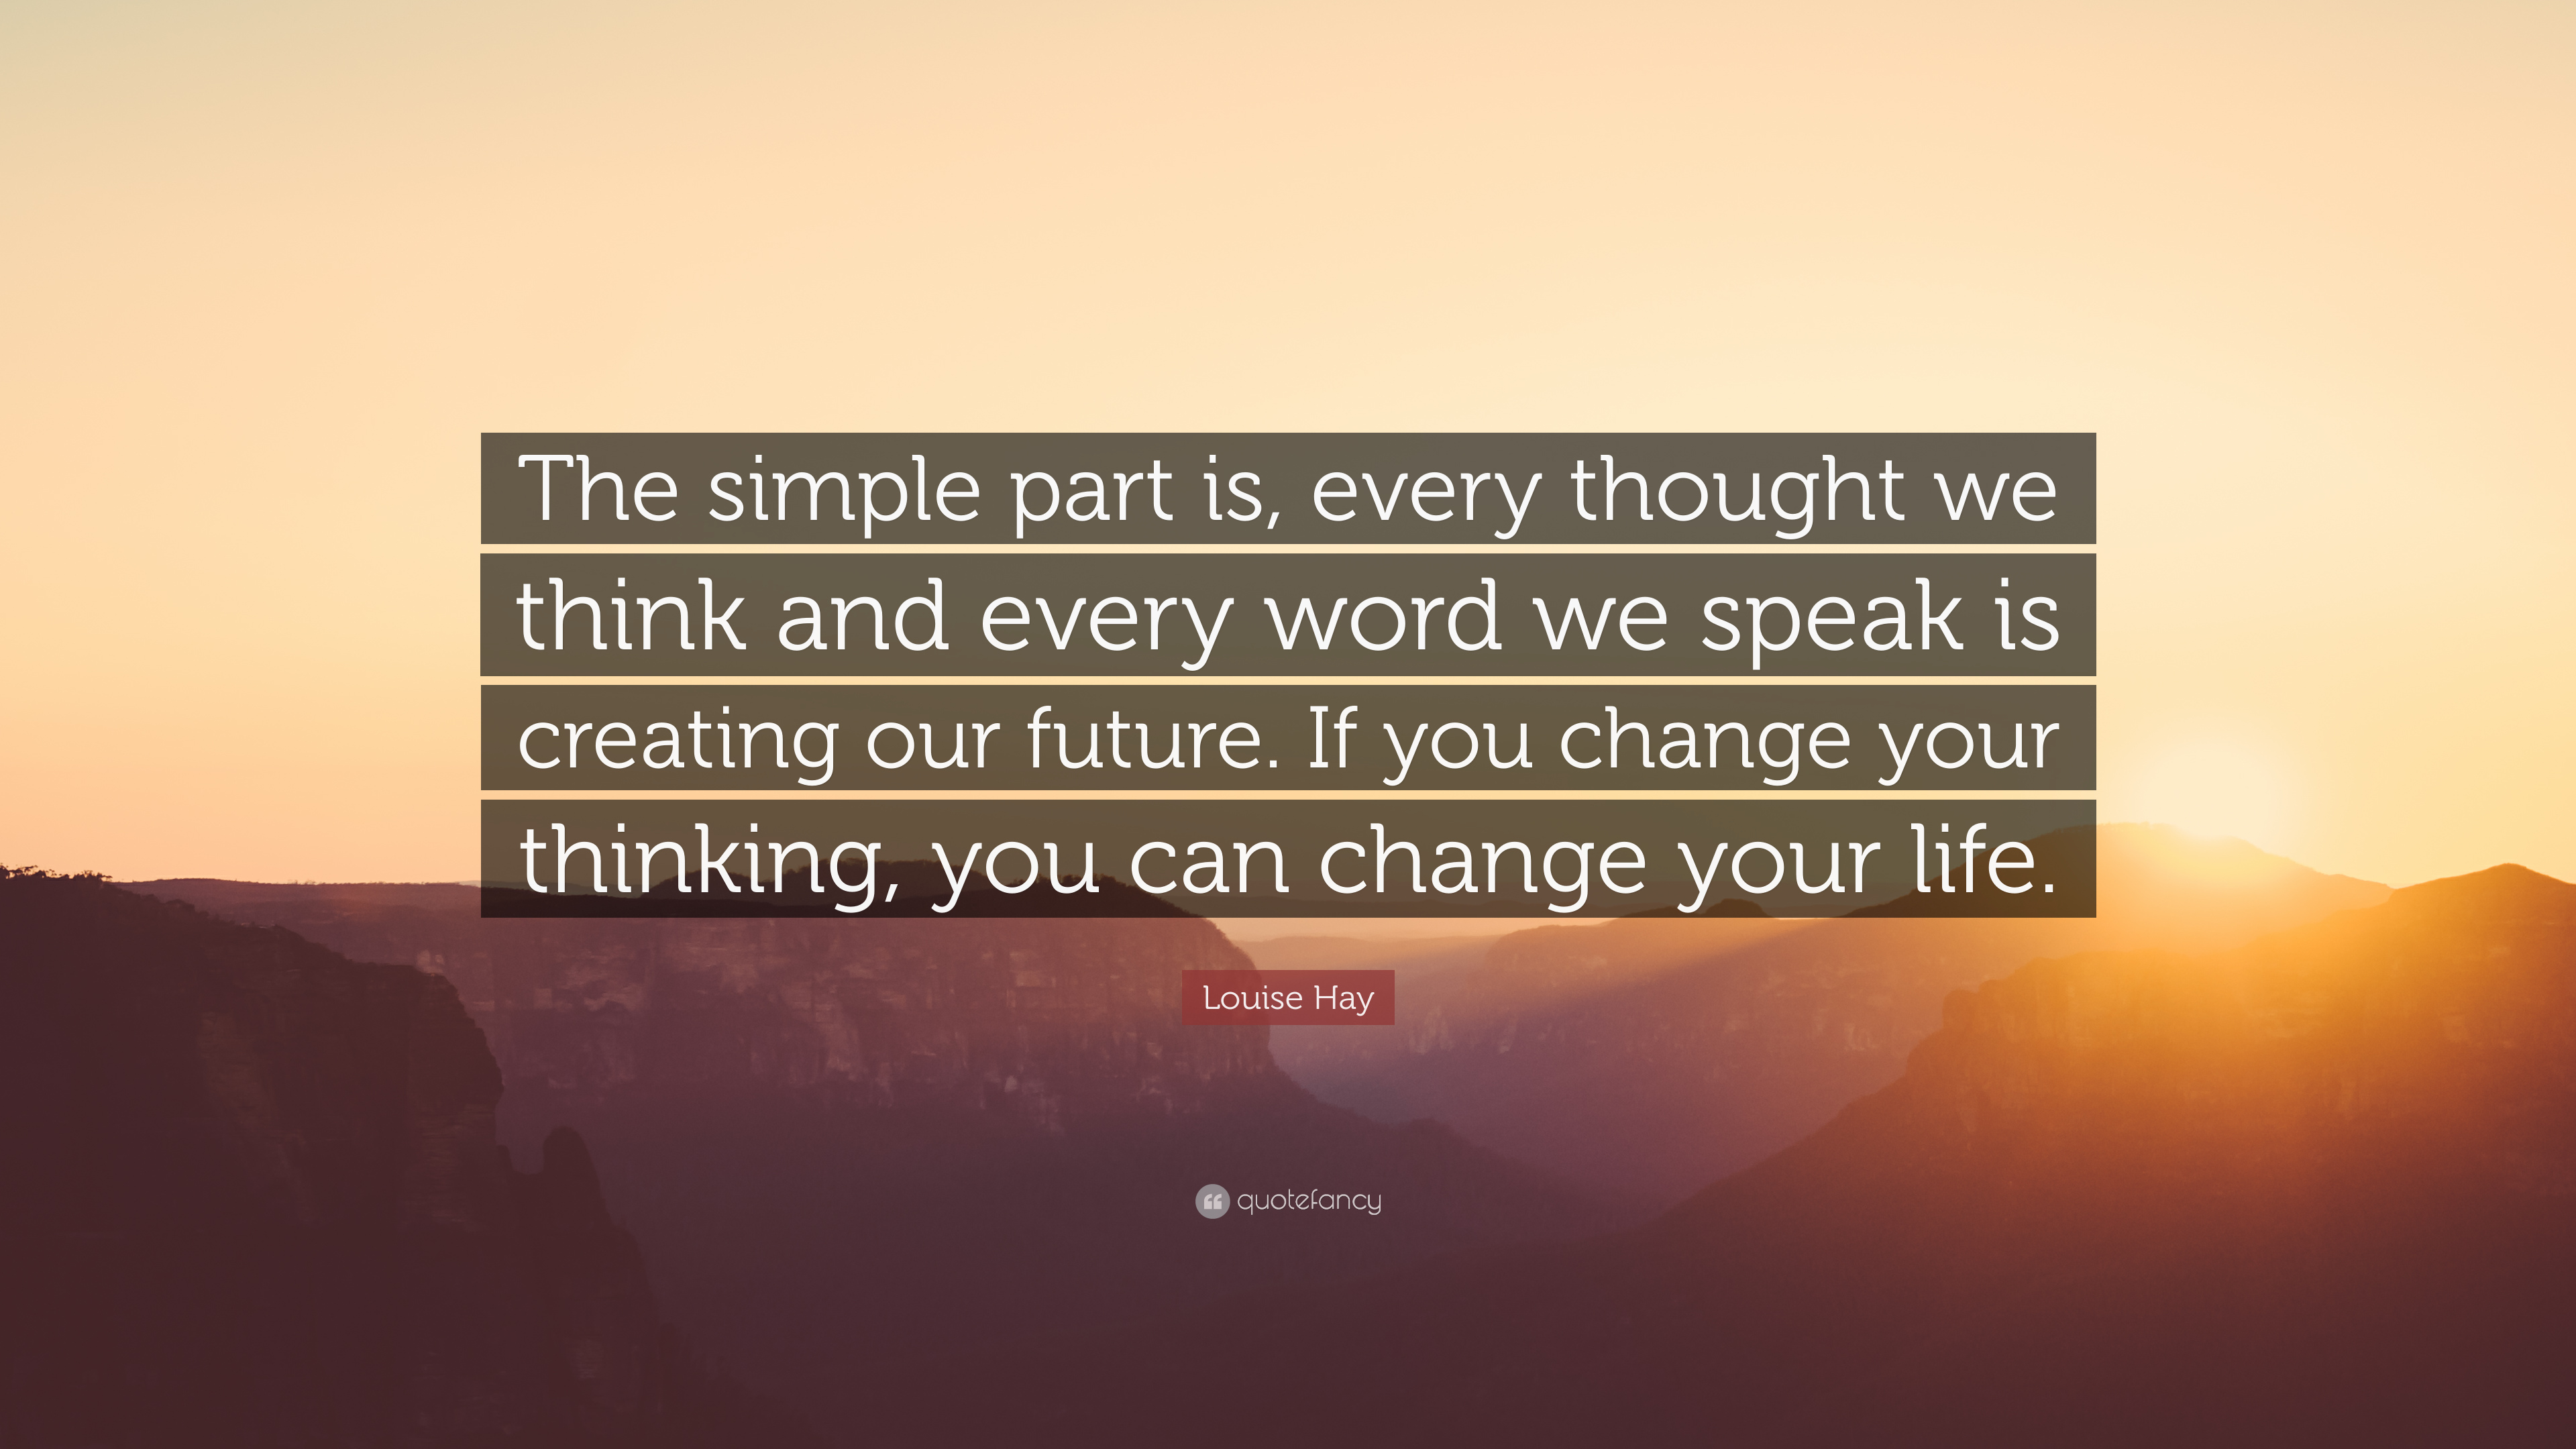 Louise Hay Quote: “The simple part is, every thought we think